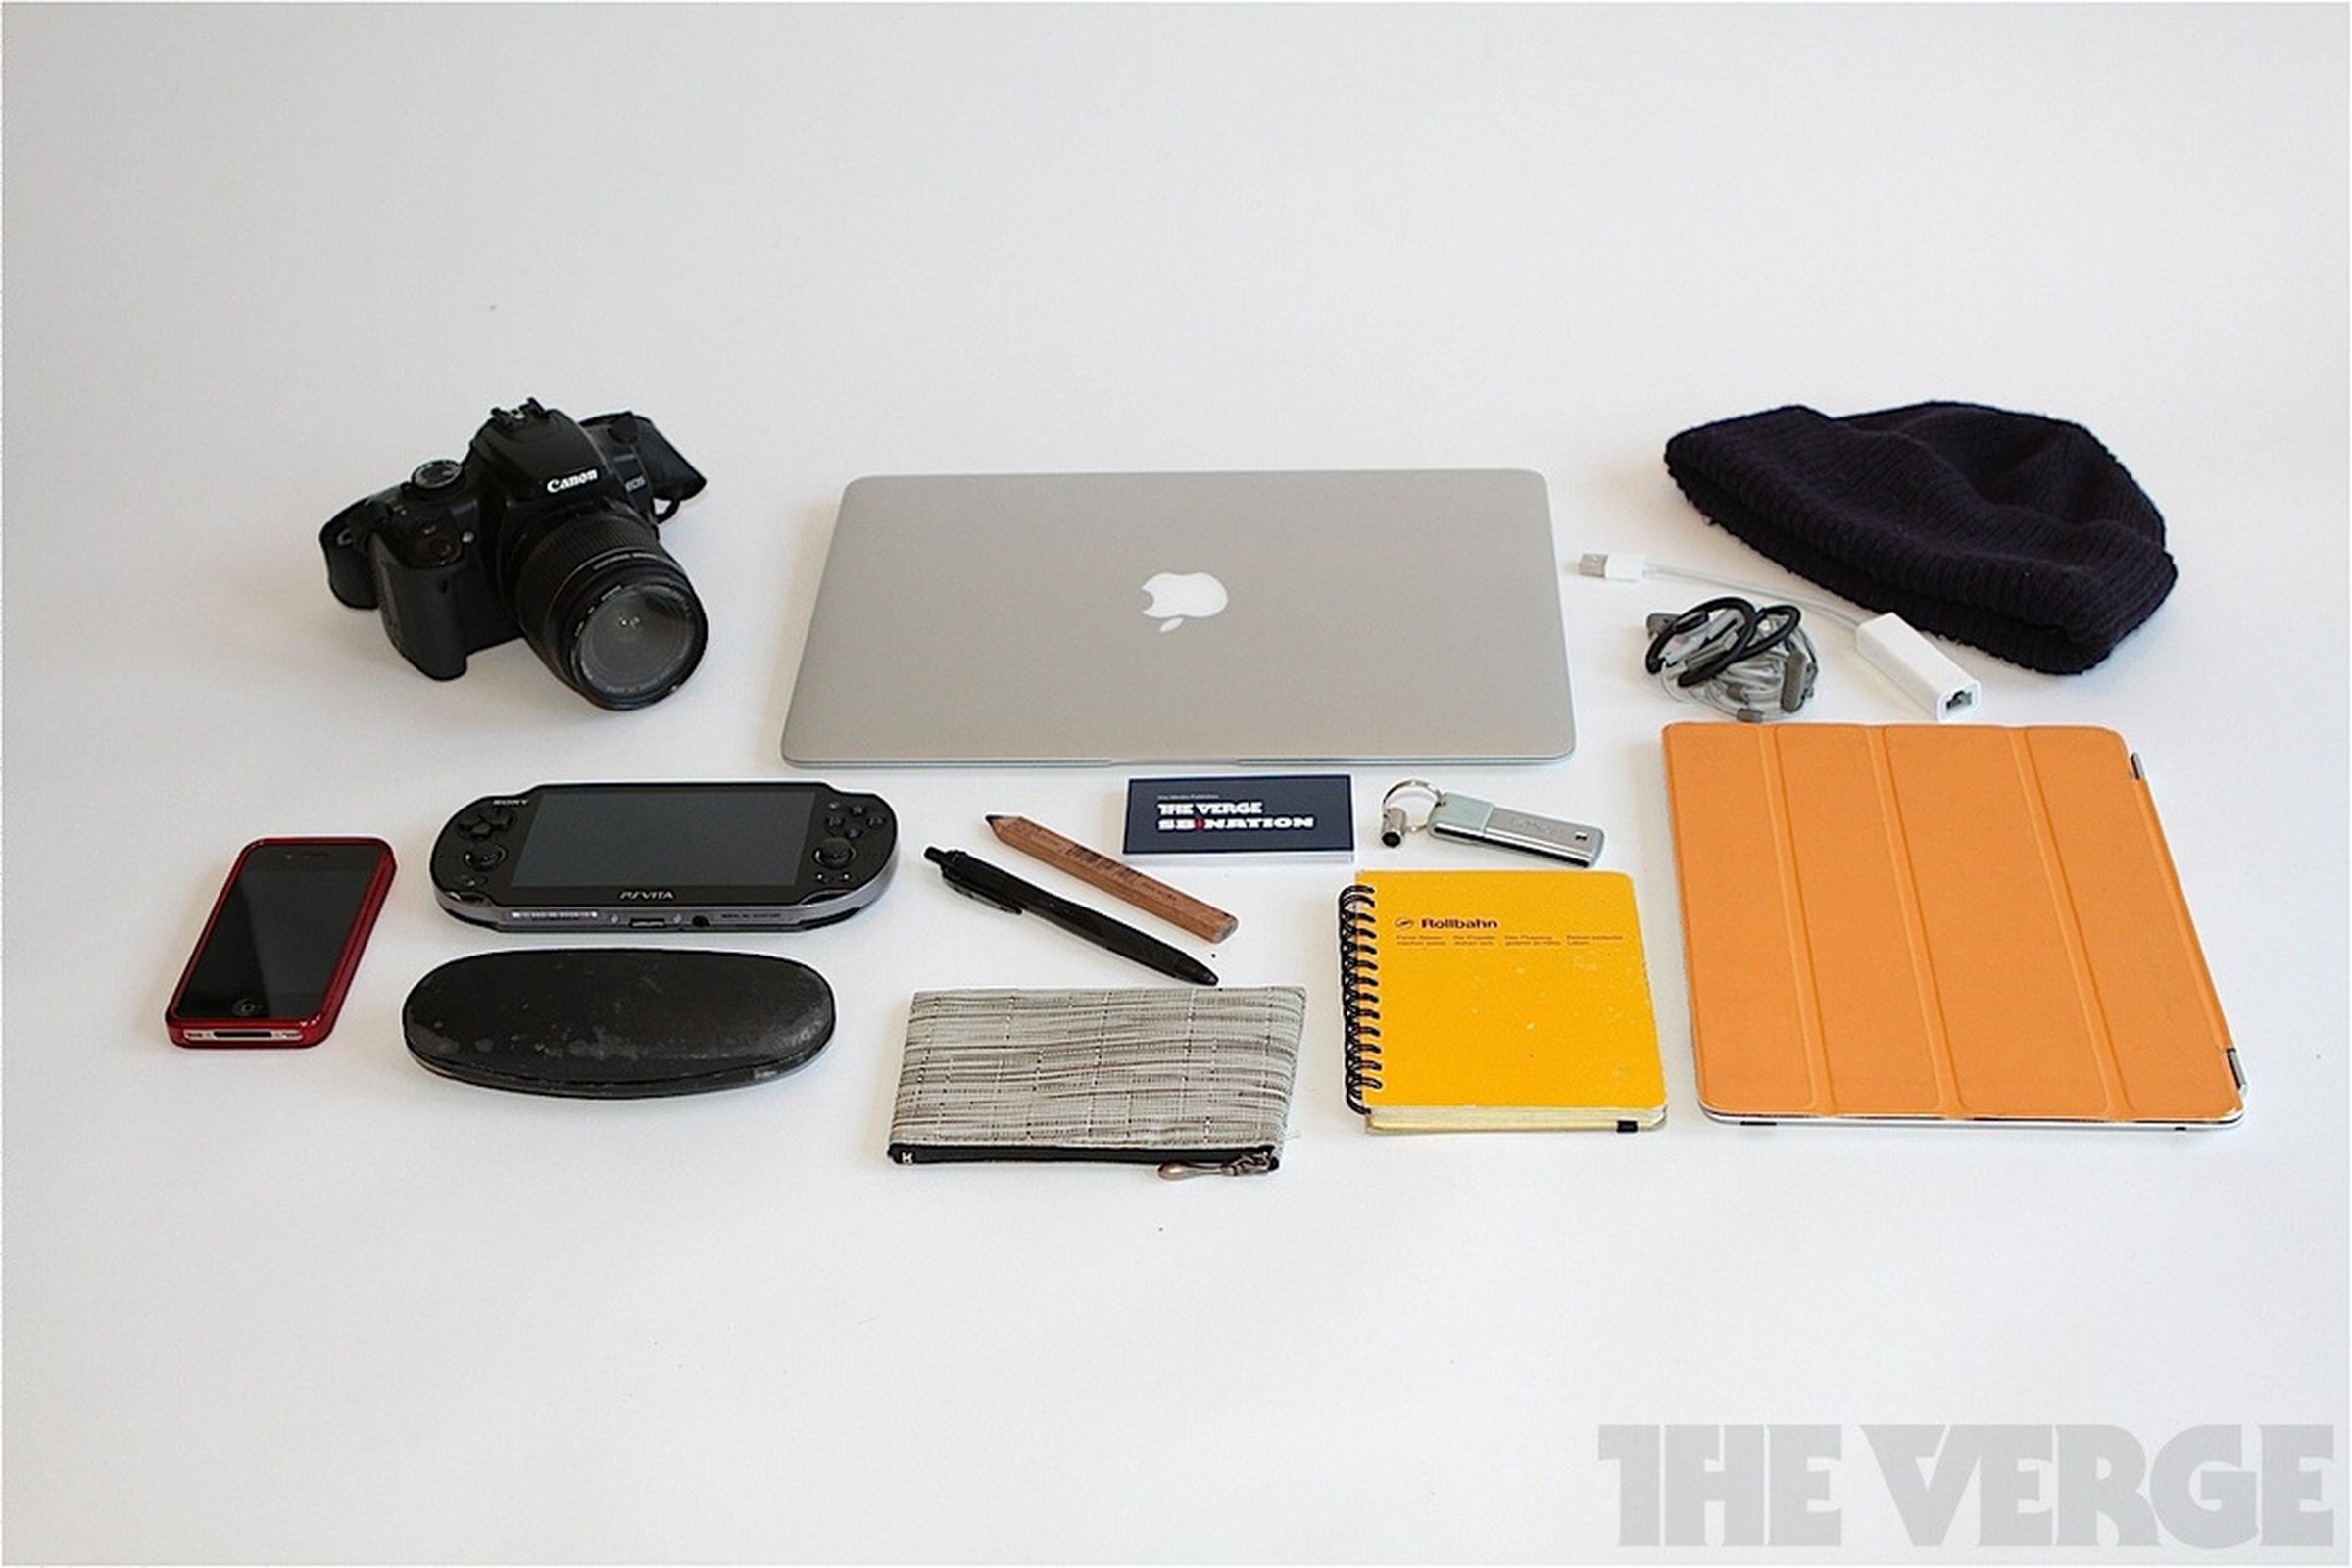 What's in your bag, Chris Grant? 